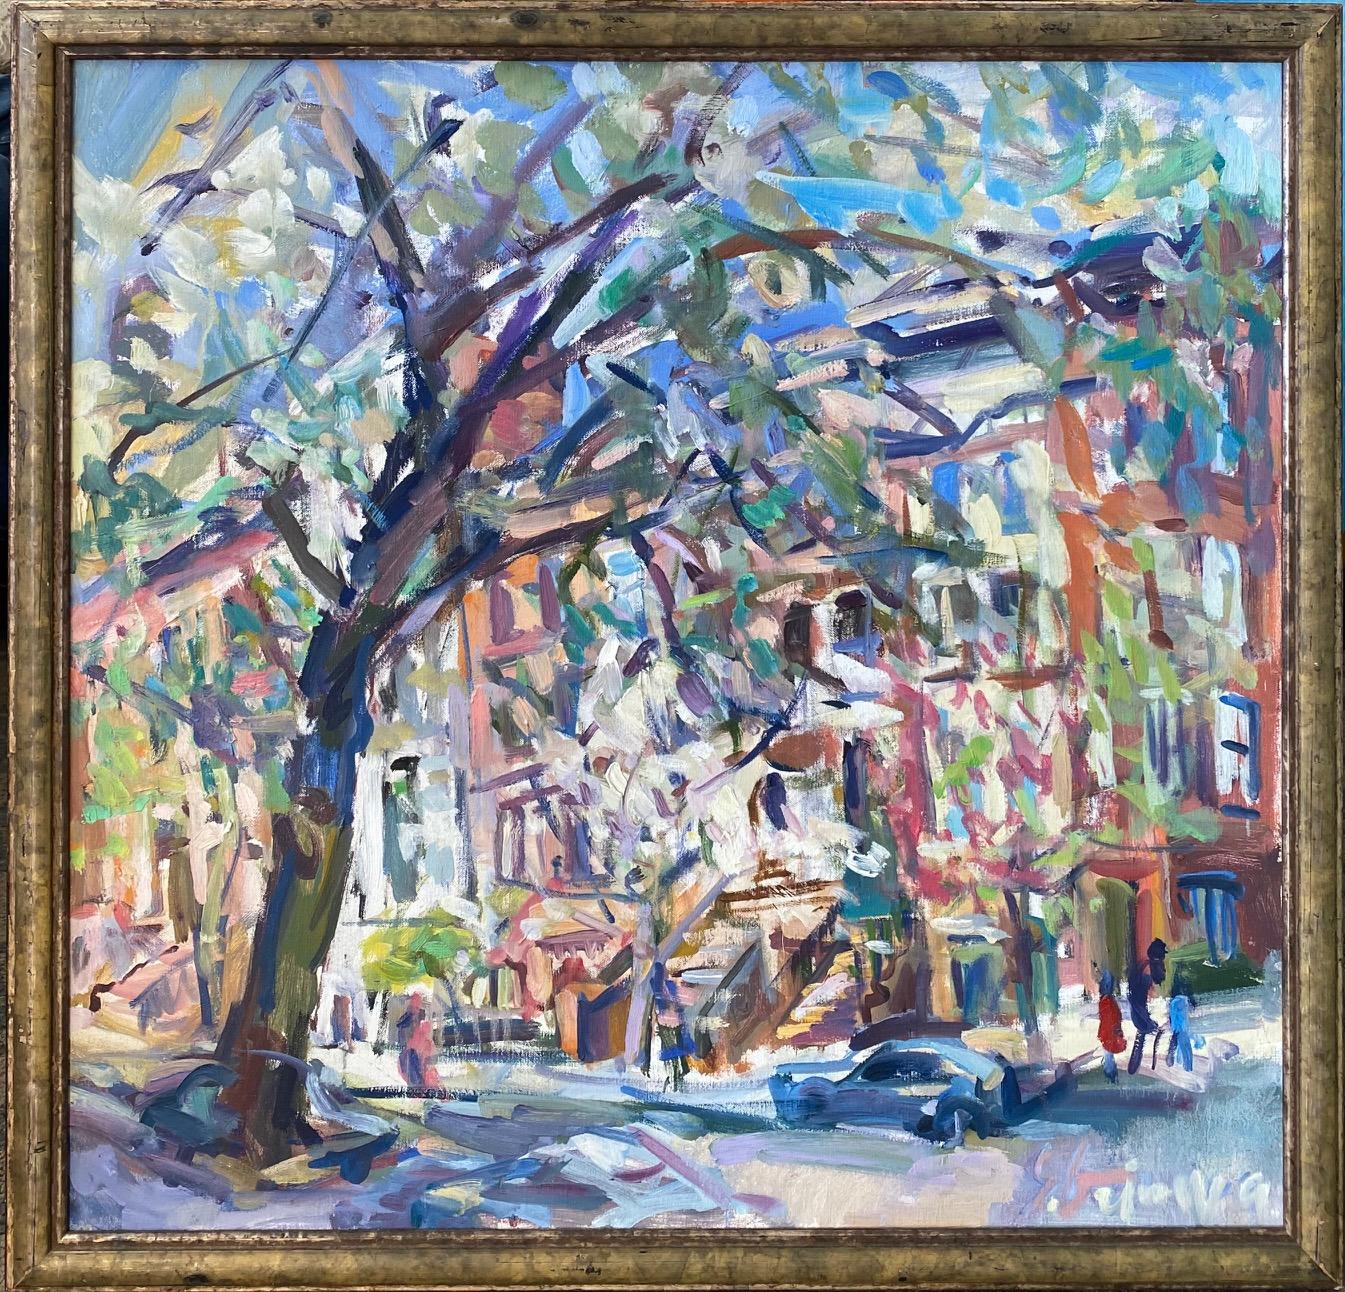 Carnegie Hill, original 28x29 abstract expressionist New York City landscape